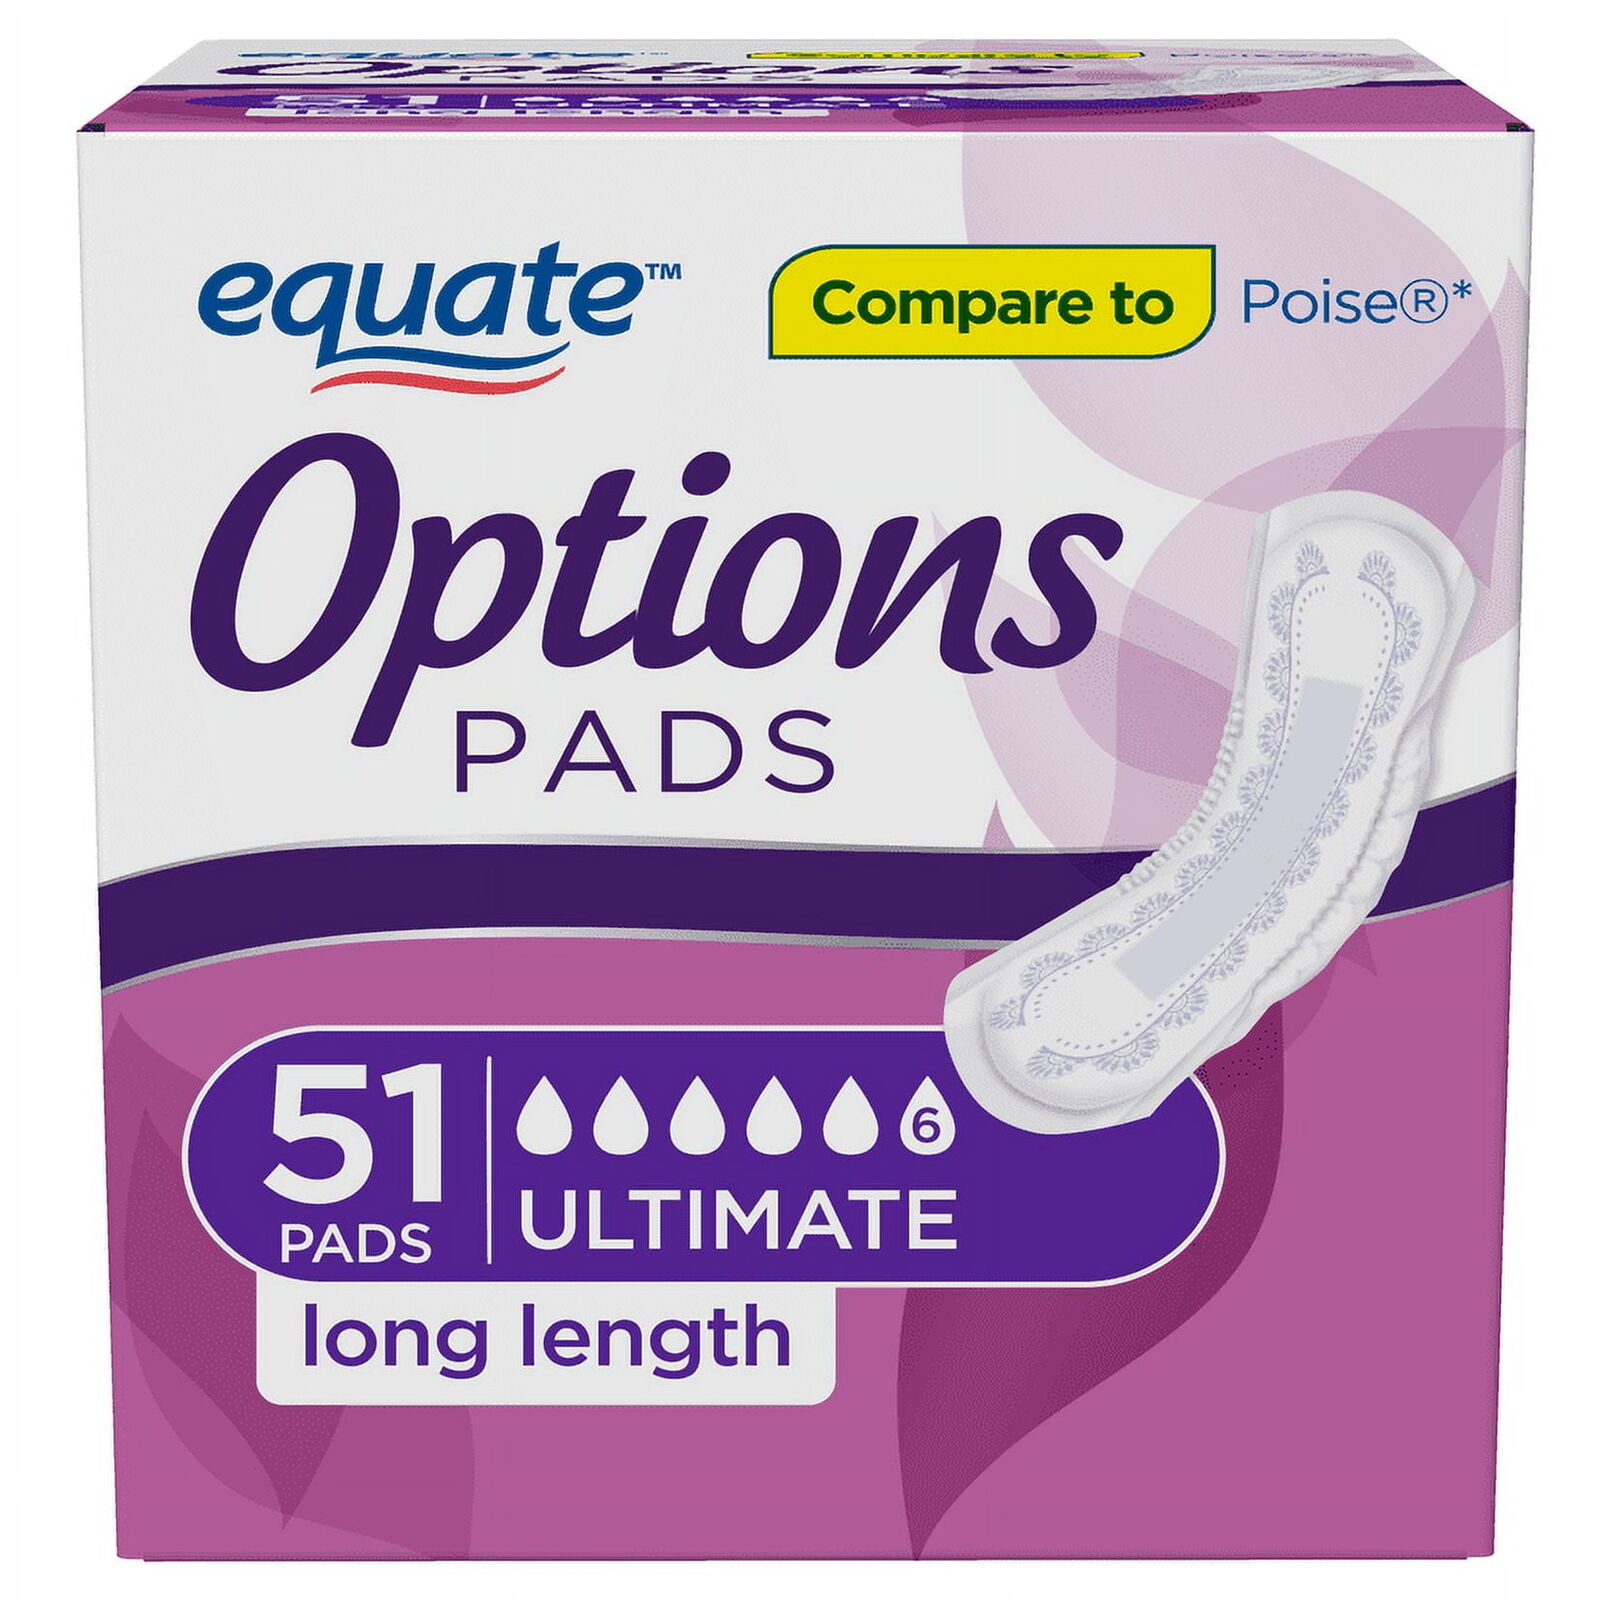 Equate Options Women's Incontinence Pads, Long Length (51 Count)